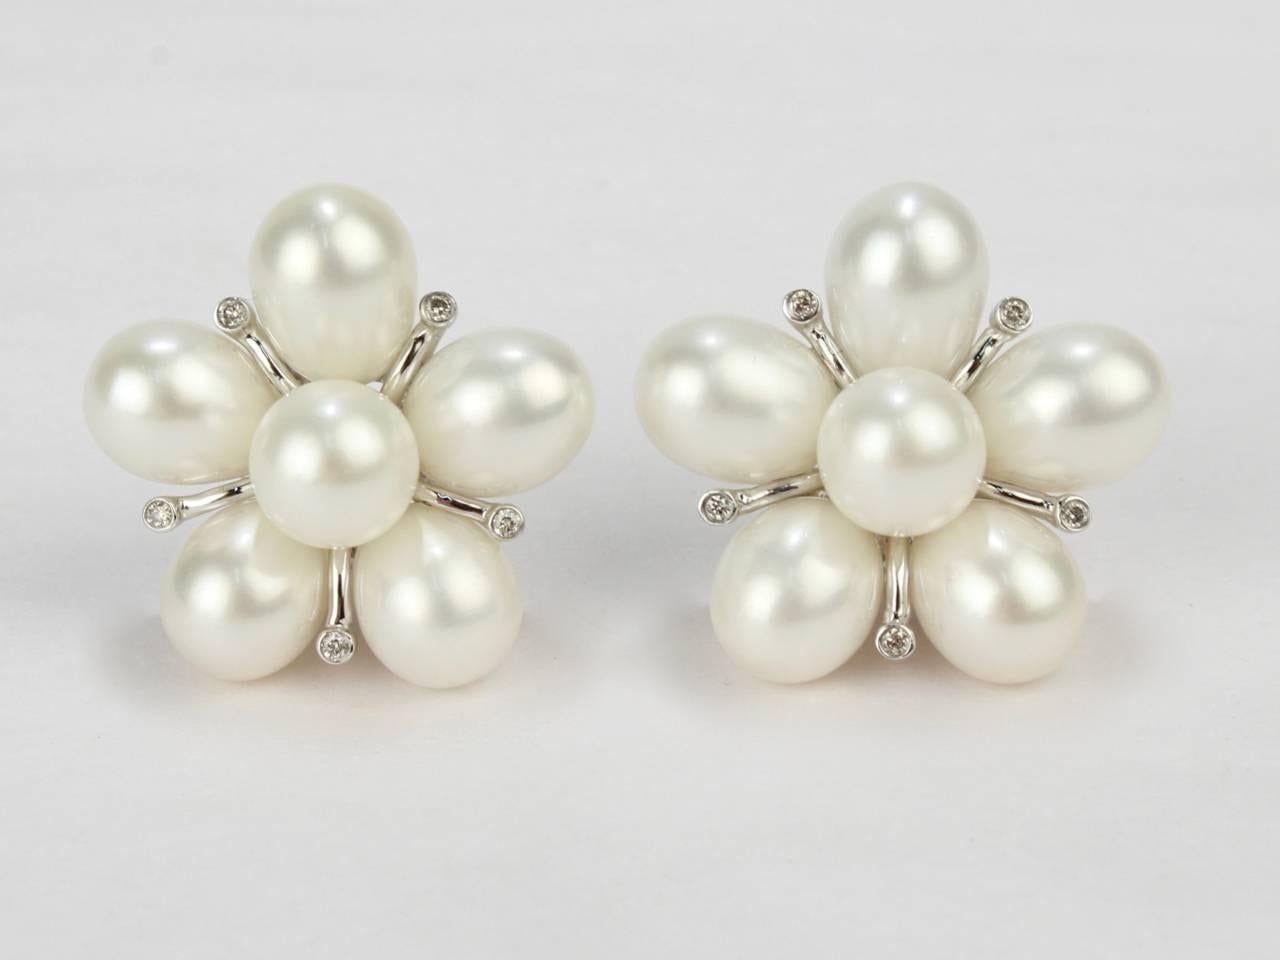 A fine pair of pearl and diamond cluster clip-on earrings set in the form of a flower.

Set in 14K white gold.

Diameter: ca. 7/8 in.

Items purchased from this dealer must delight you. Purchases may be returned for any reason for a period of seven